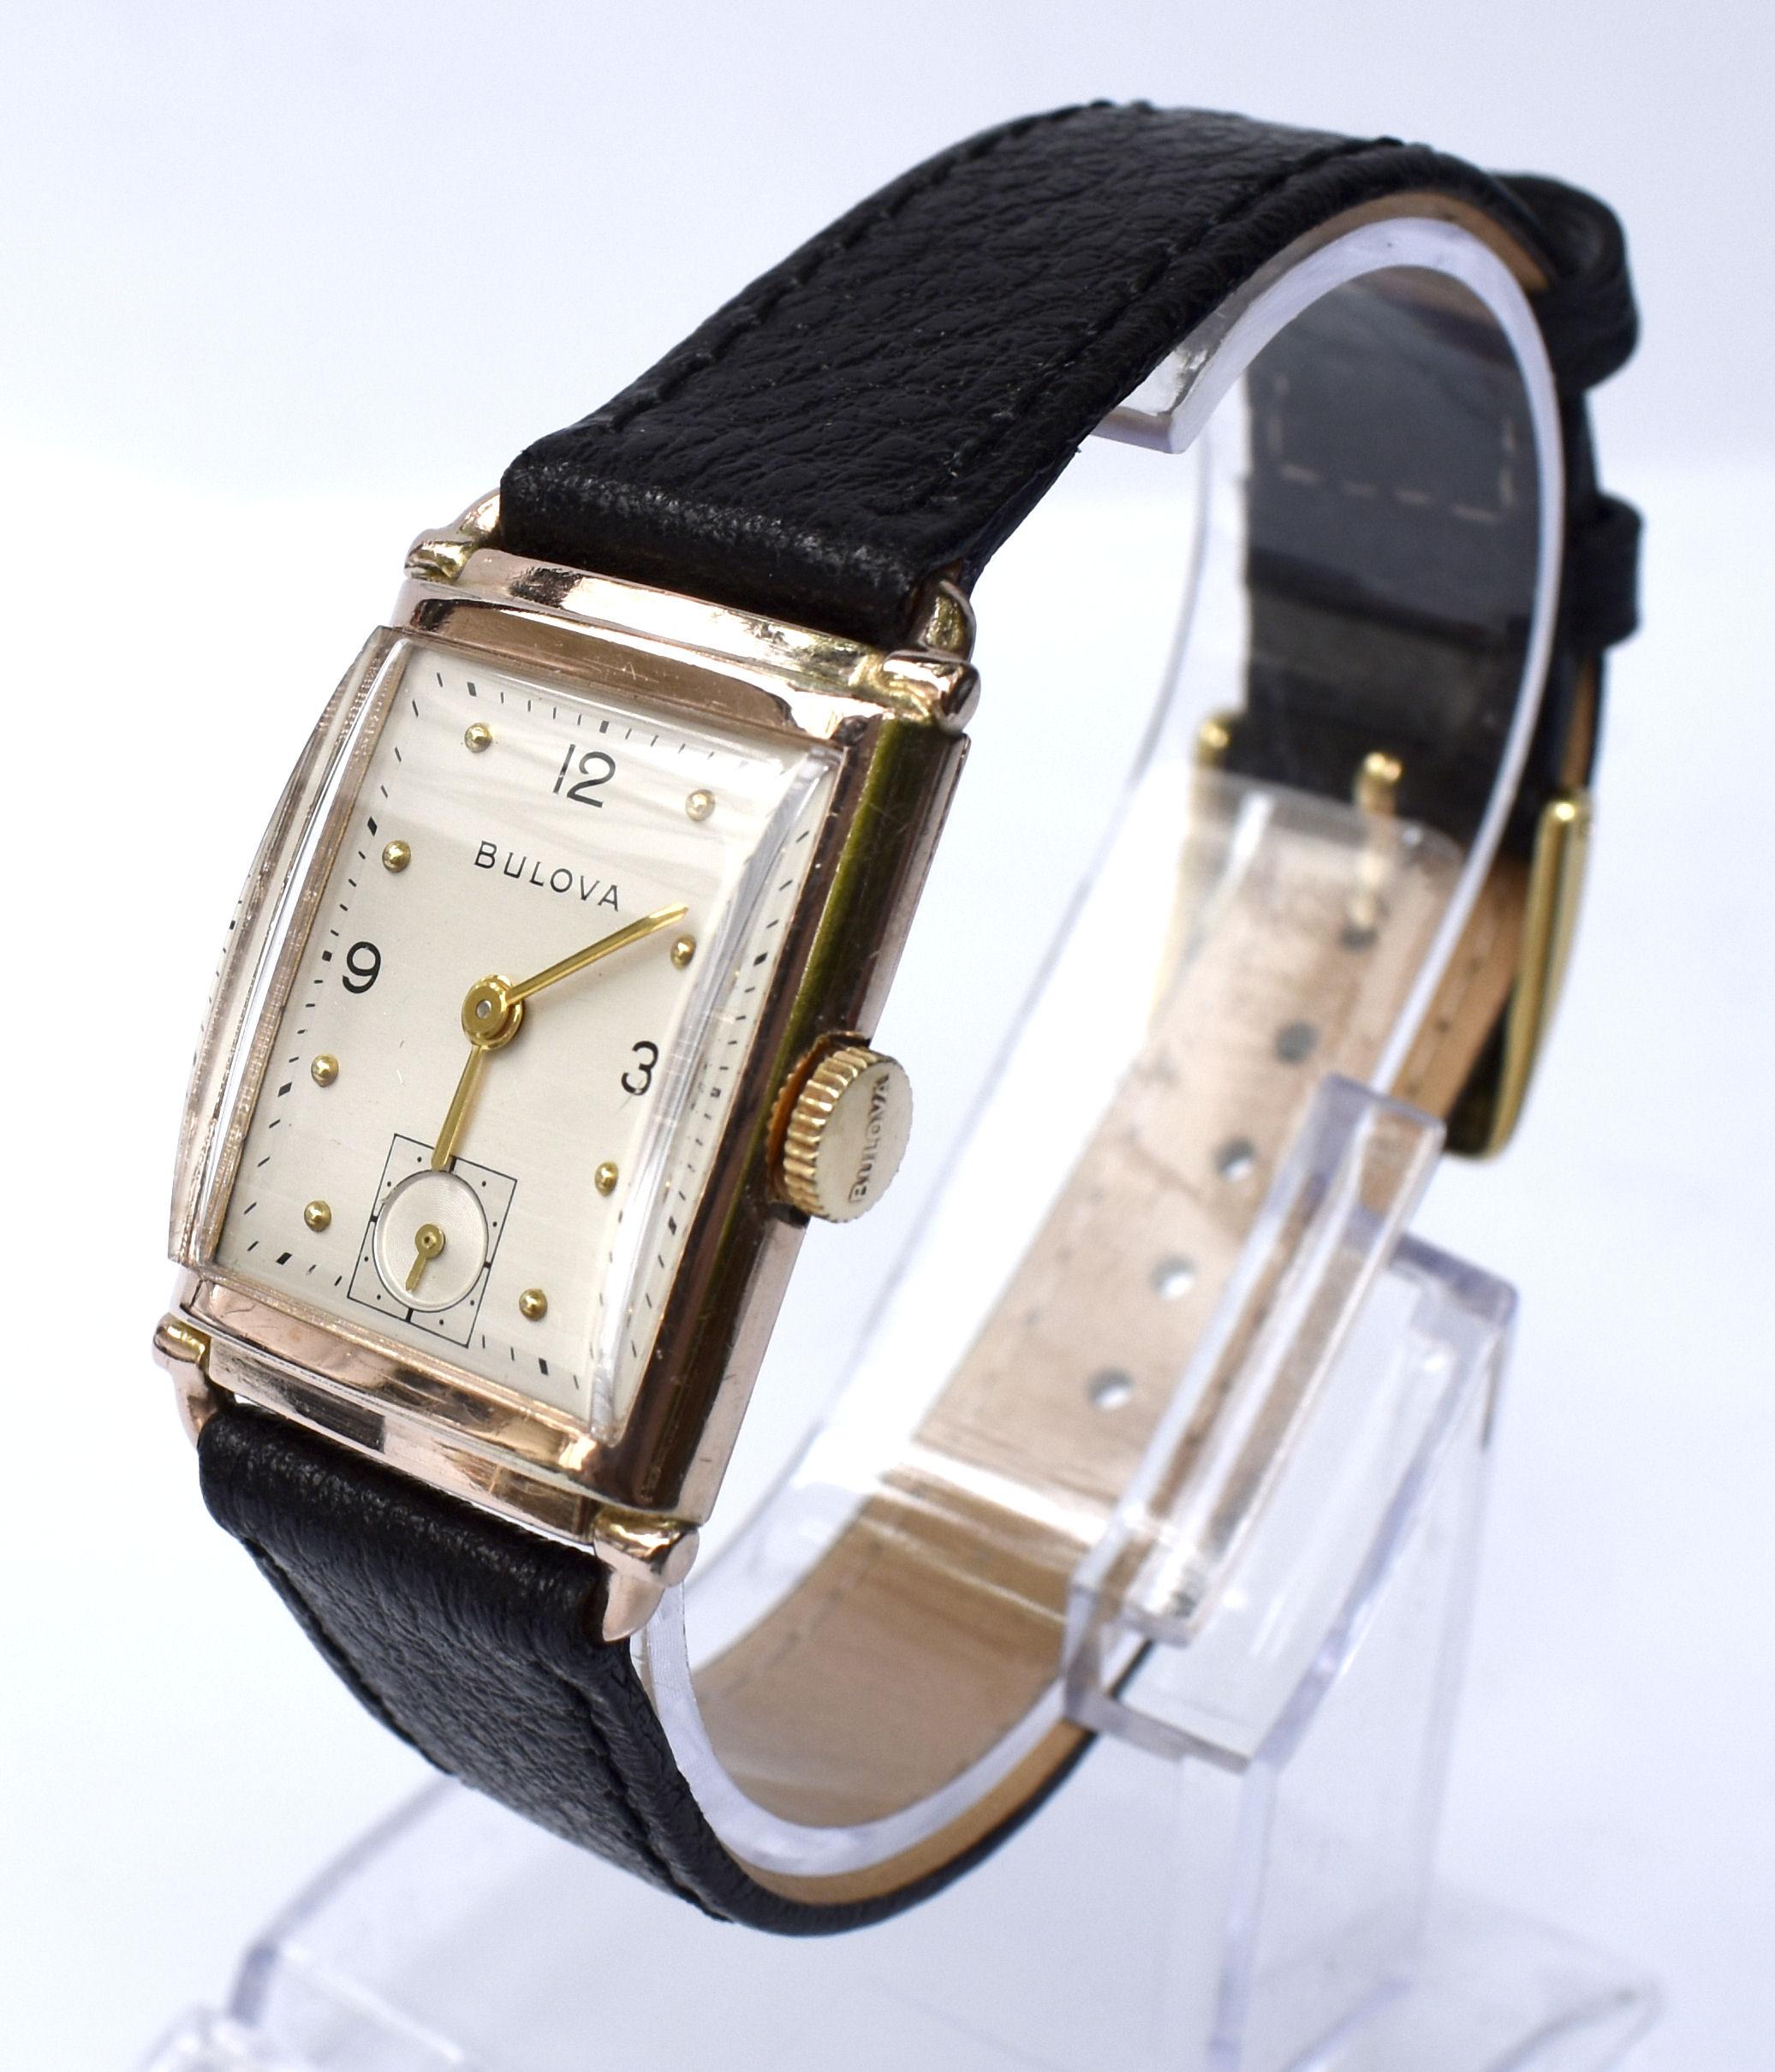 For your consideration is this superb 1946 Bulova President gentleman's manual wrist watch in fabulous condition. So often the dials and crystals are scratched and heavily worn so we were delighted to have sourced this fine example that's obviously